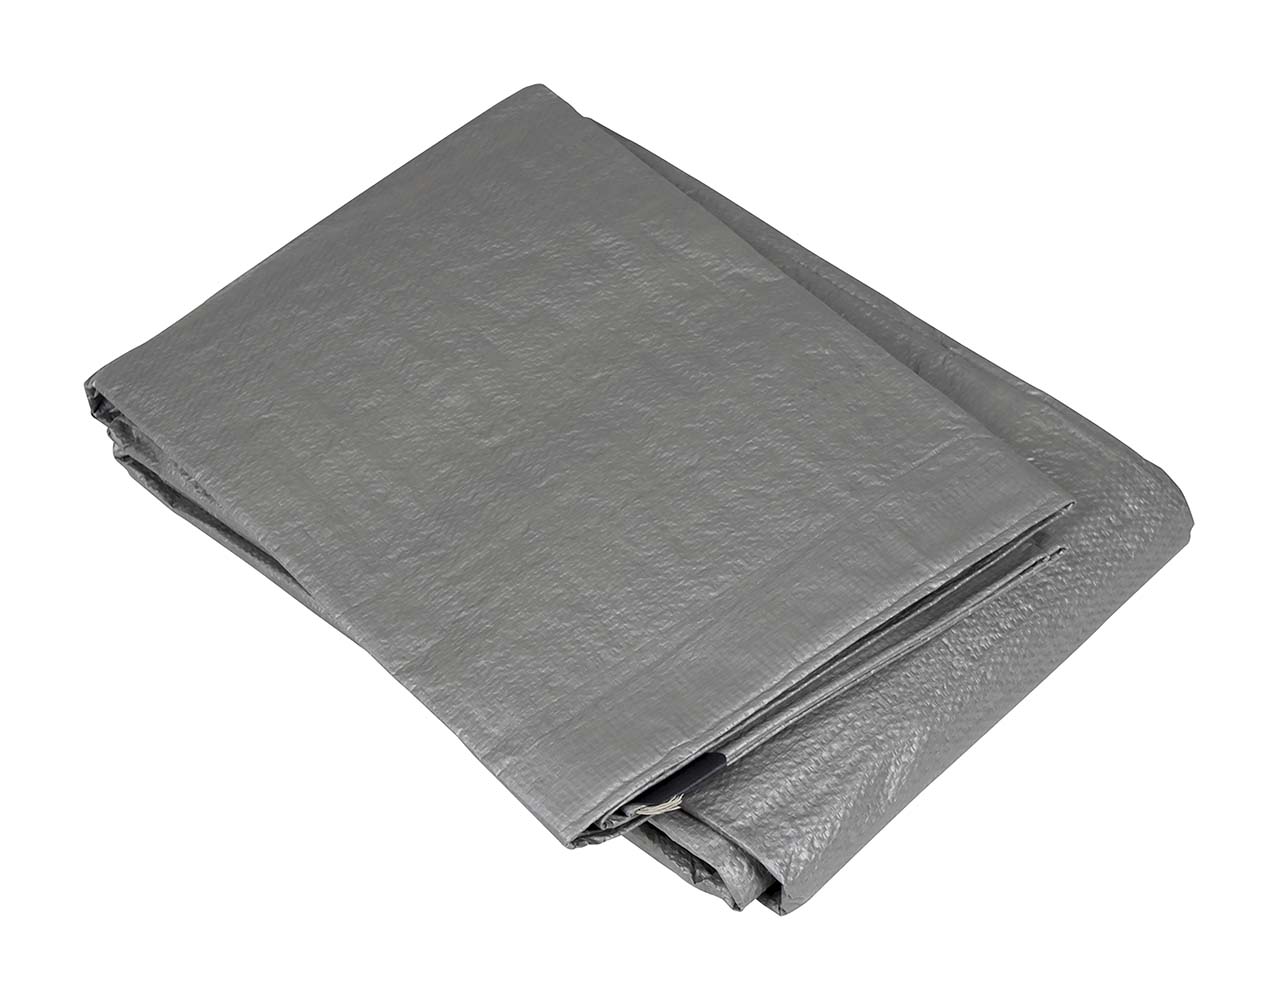 4215900 A sturdy cover sail. This sail is water proof, weather proof and high quality (120 gr/m²). With welded seams, reinforced edges and sturdy eyelets.